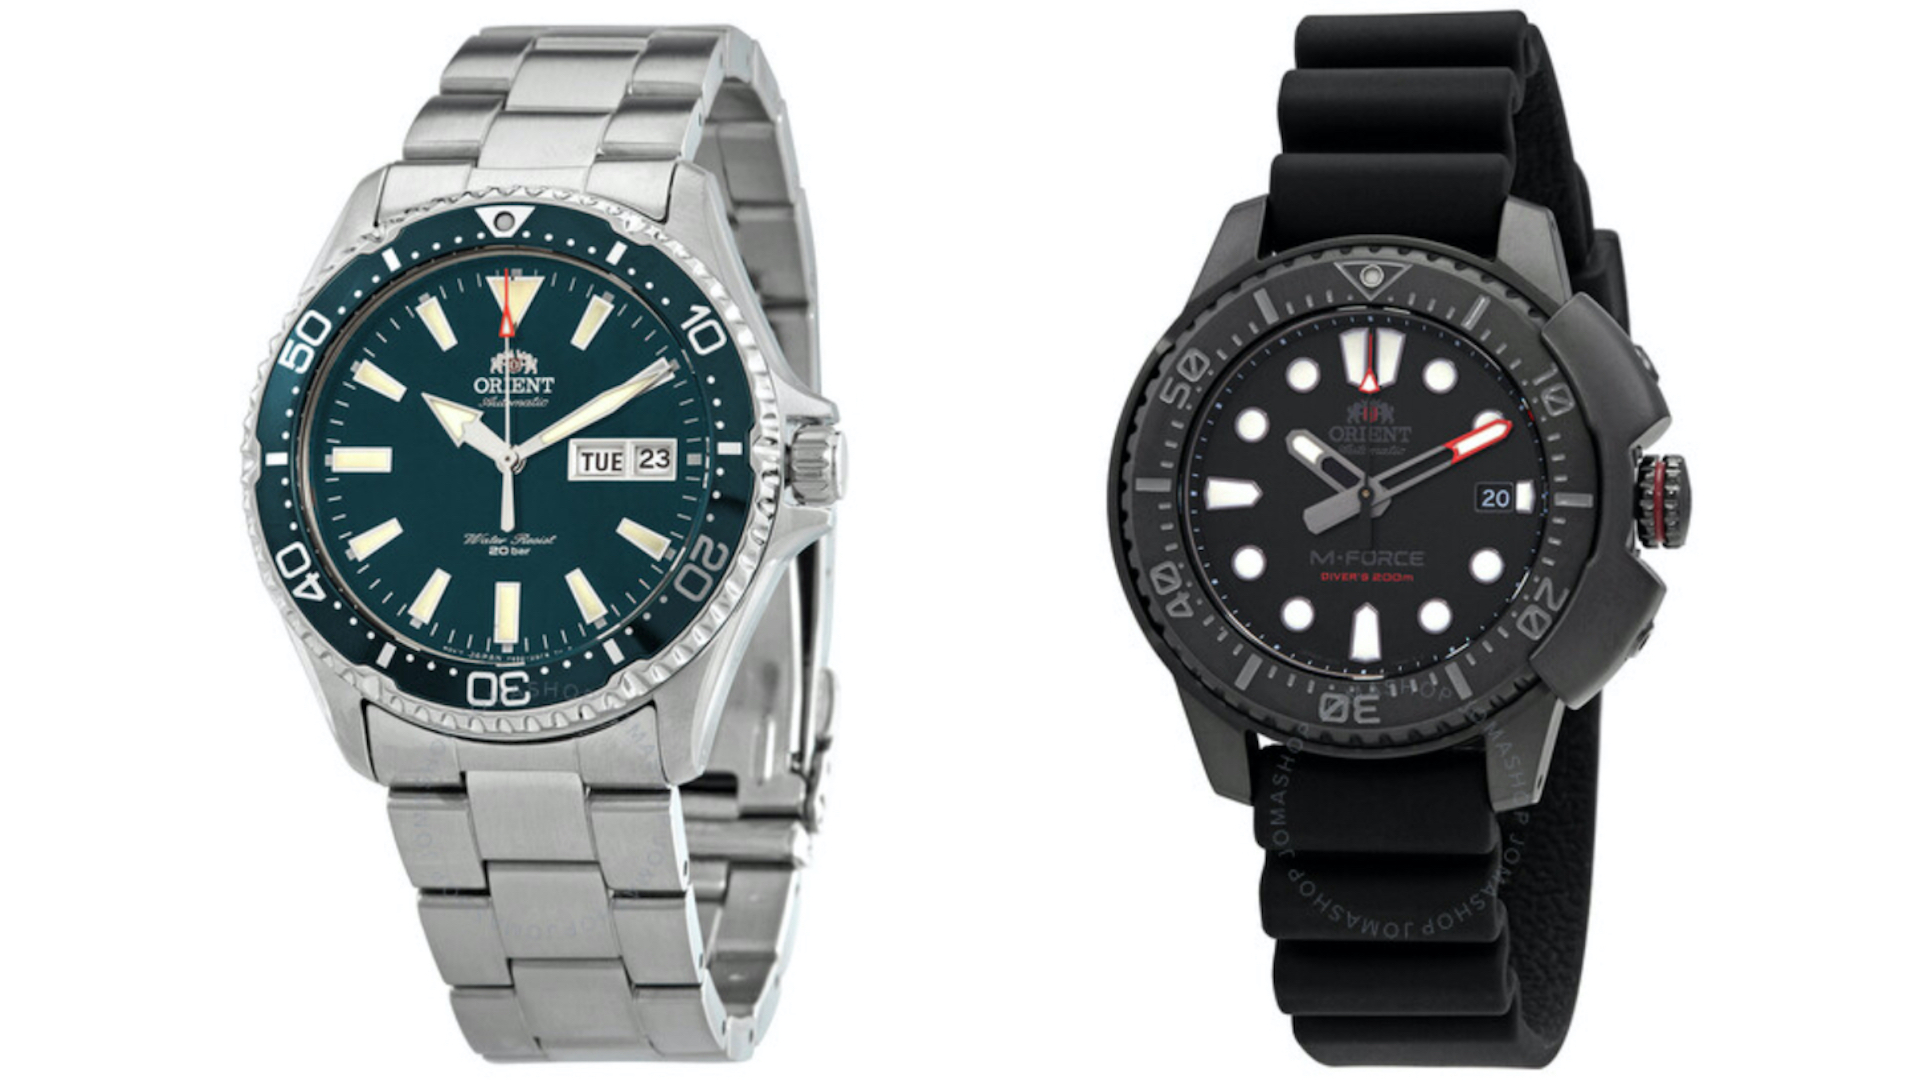 Jomashop watch sale: Score Orient watches for an absolute steal